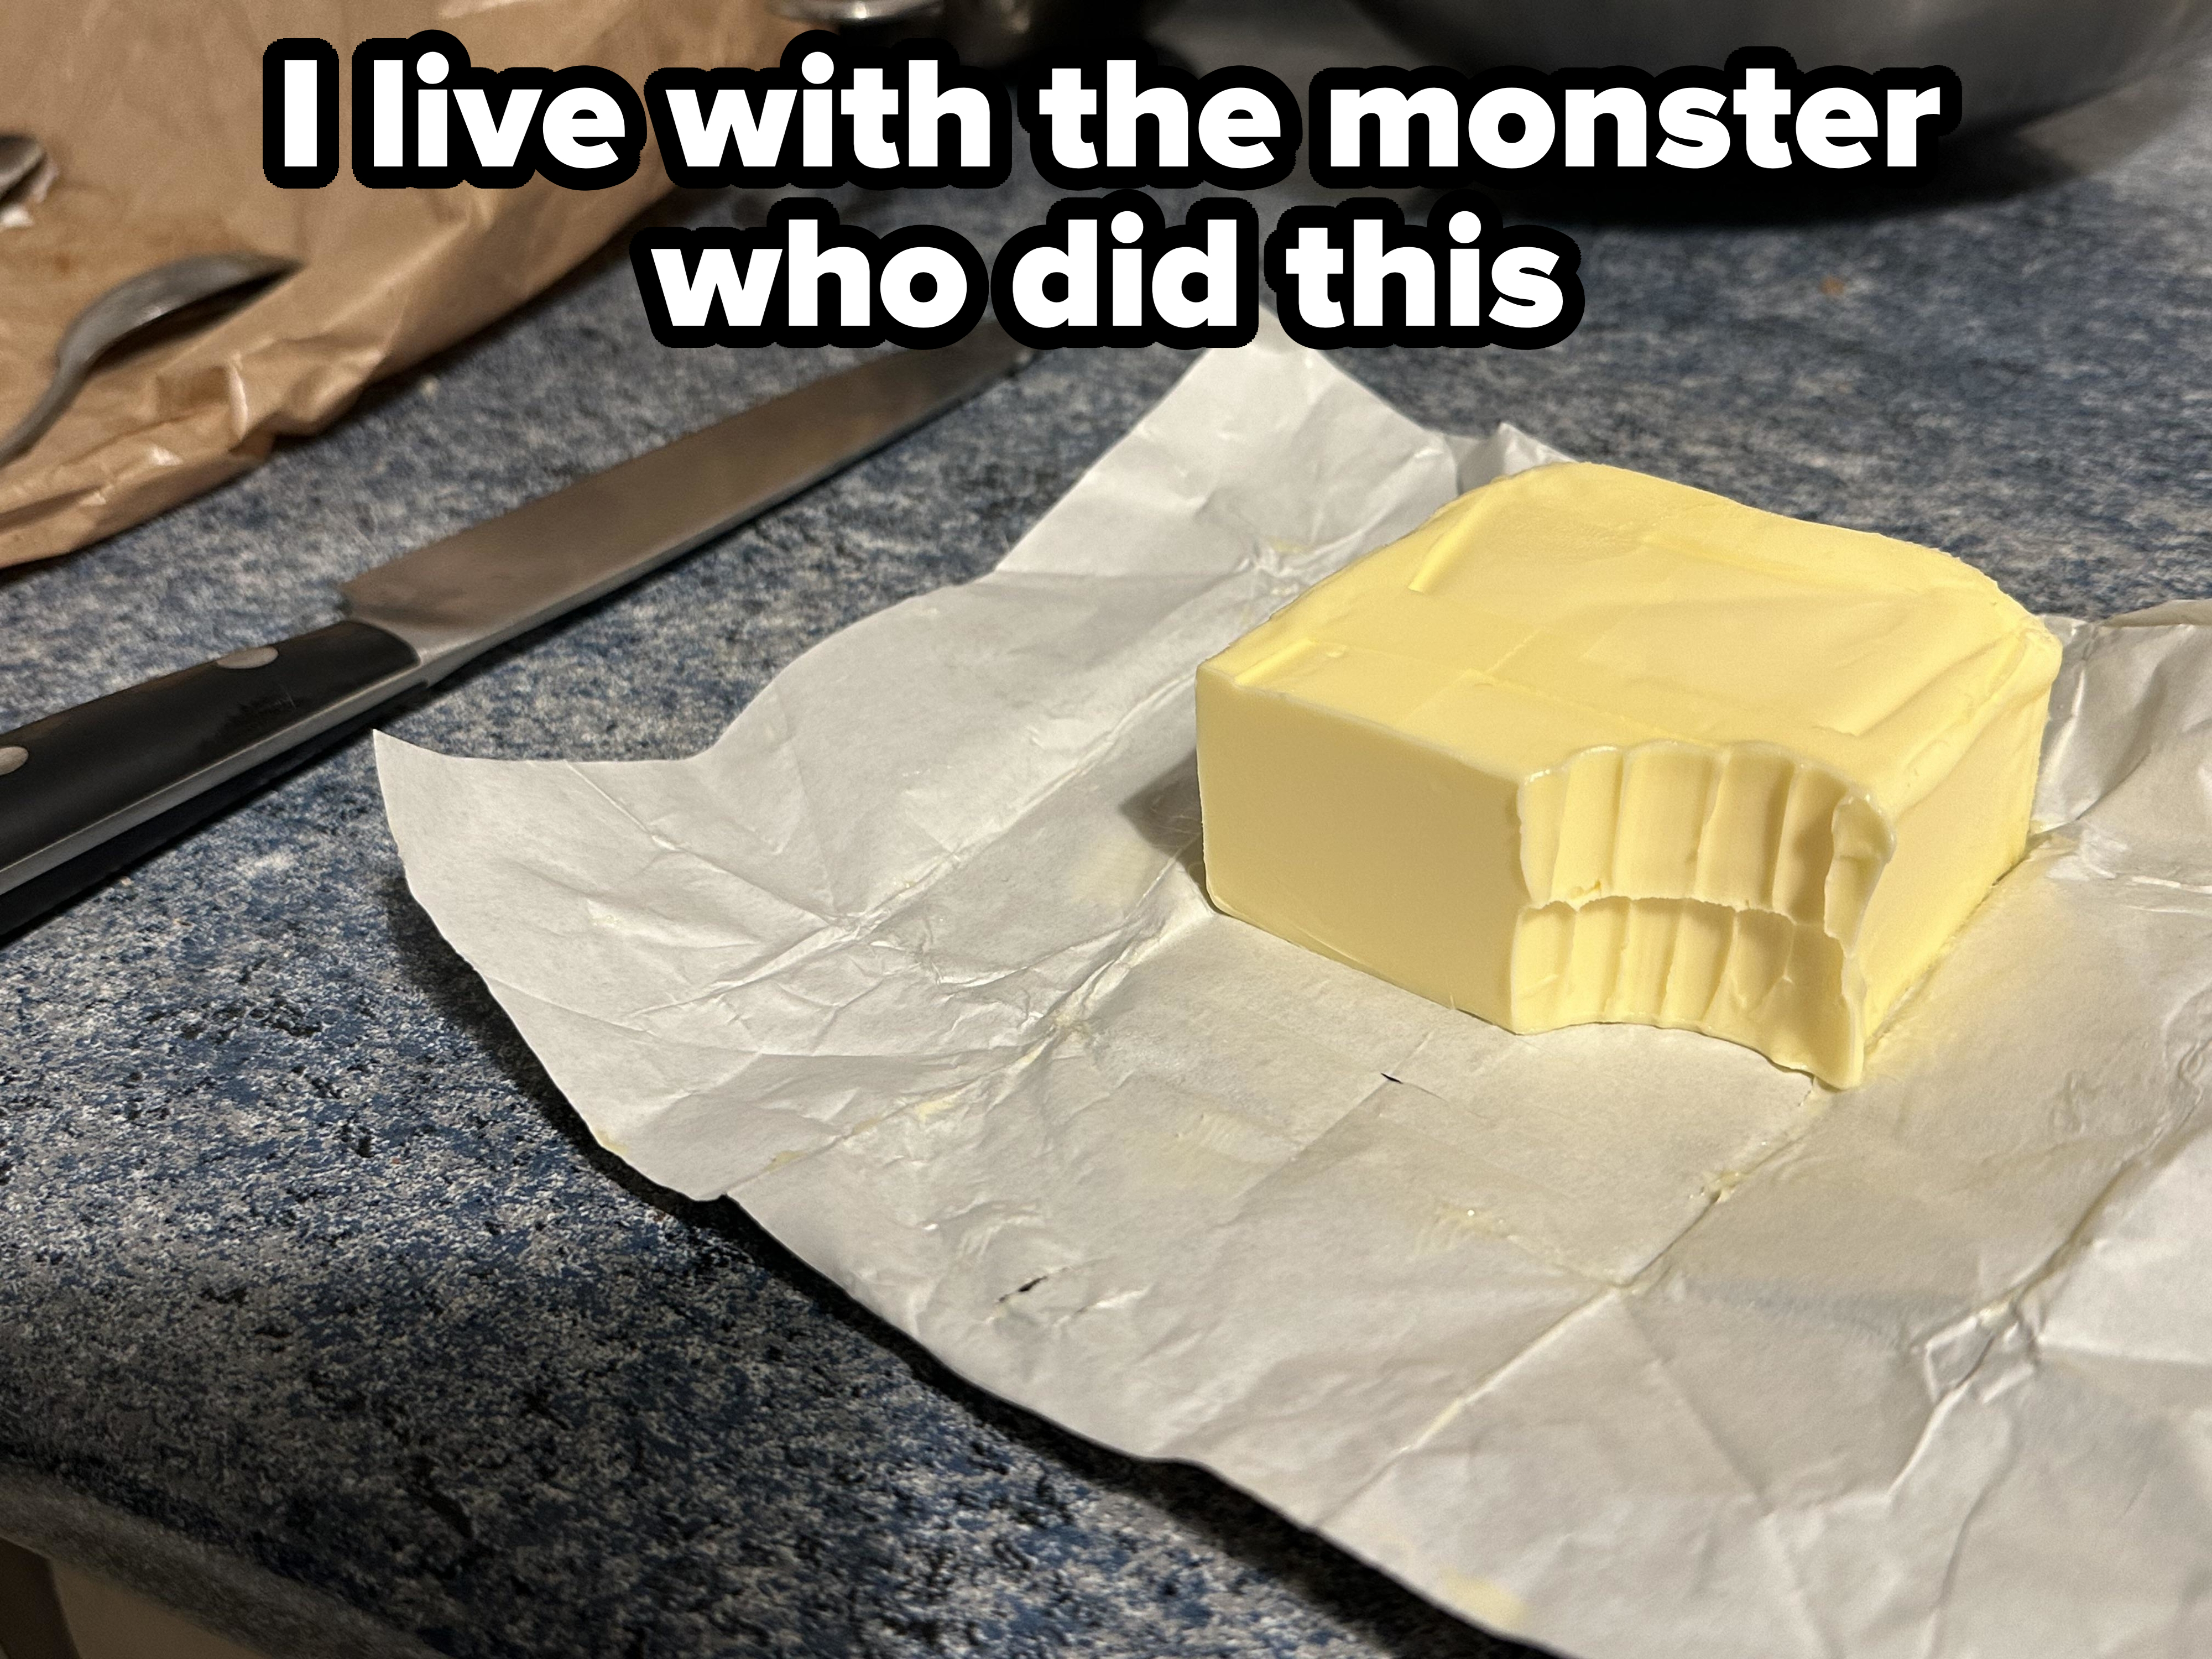 Stick of butter on a kitchen counter with a huge bite taken out of it